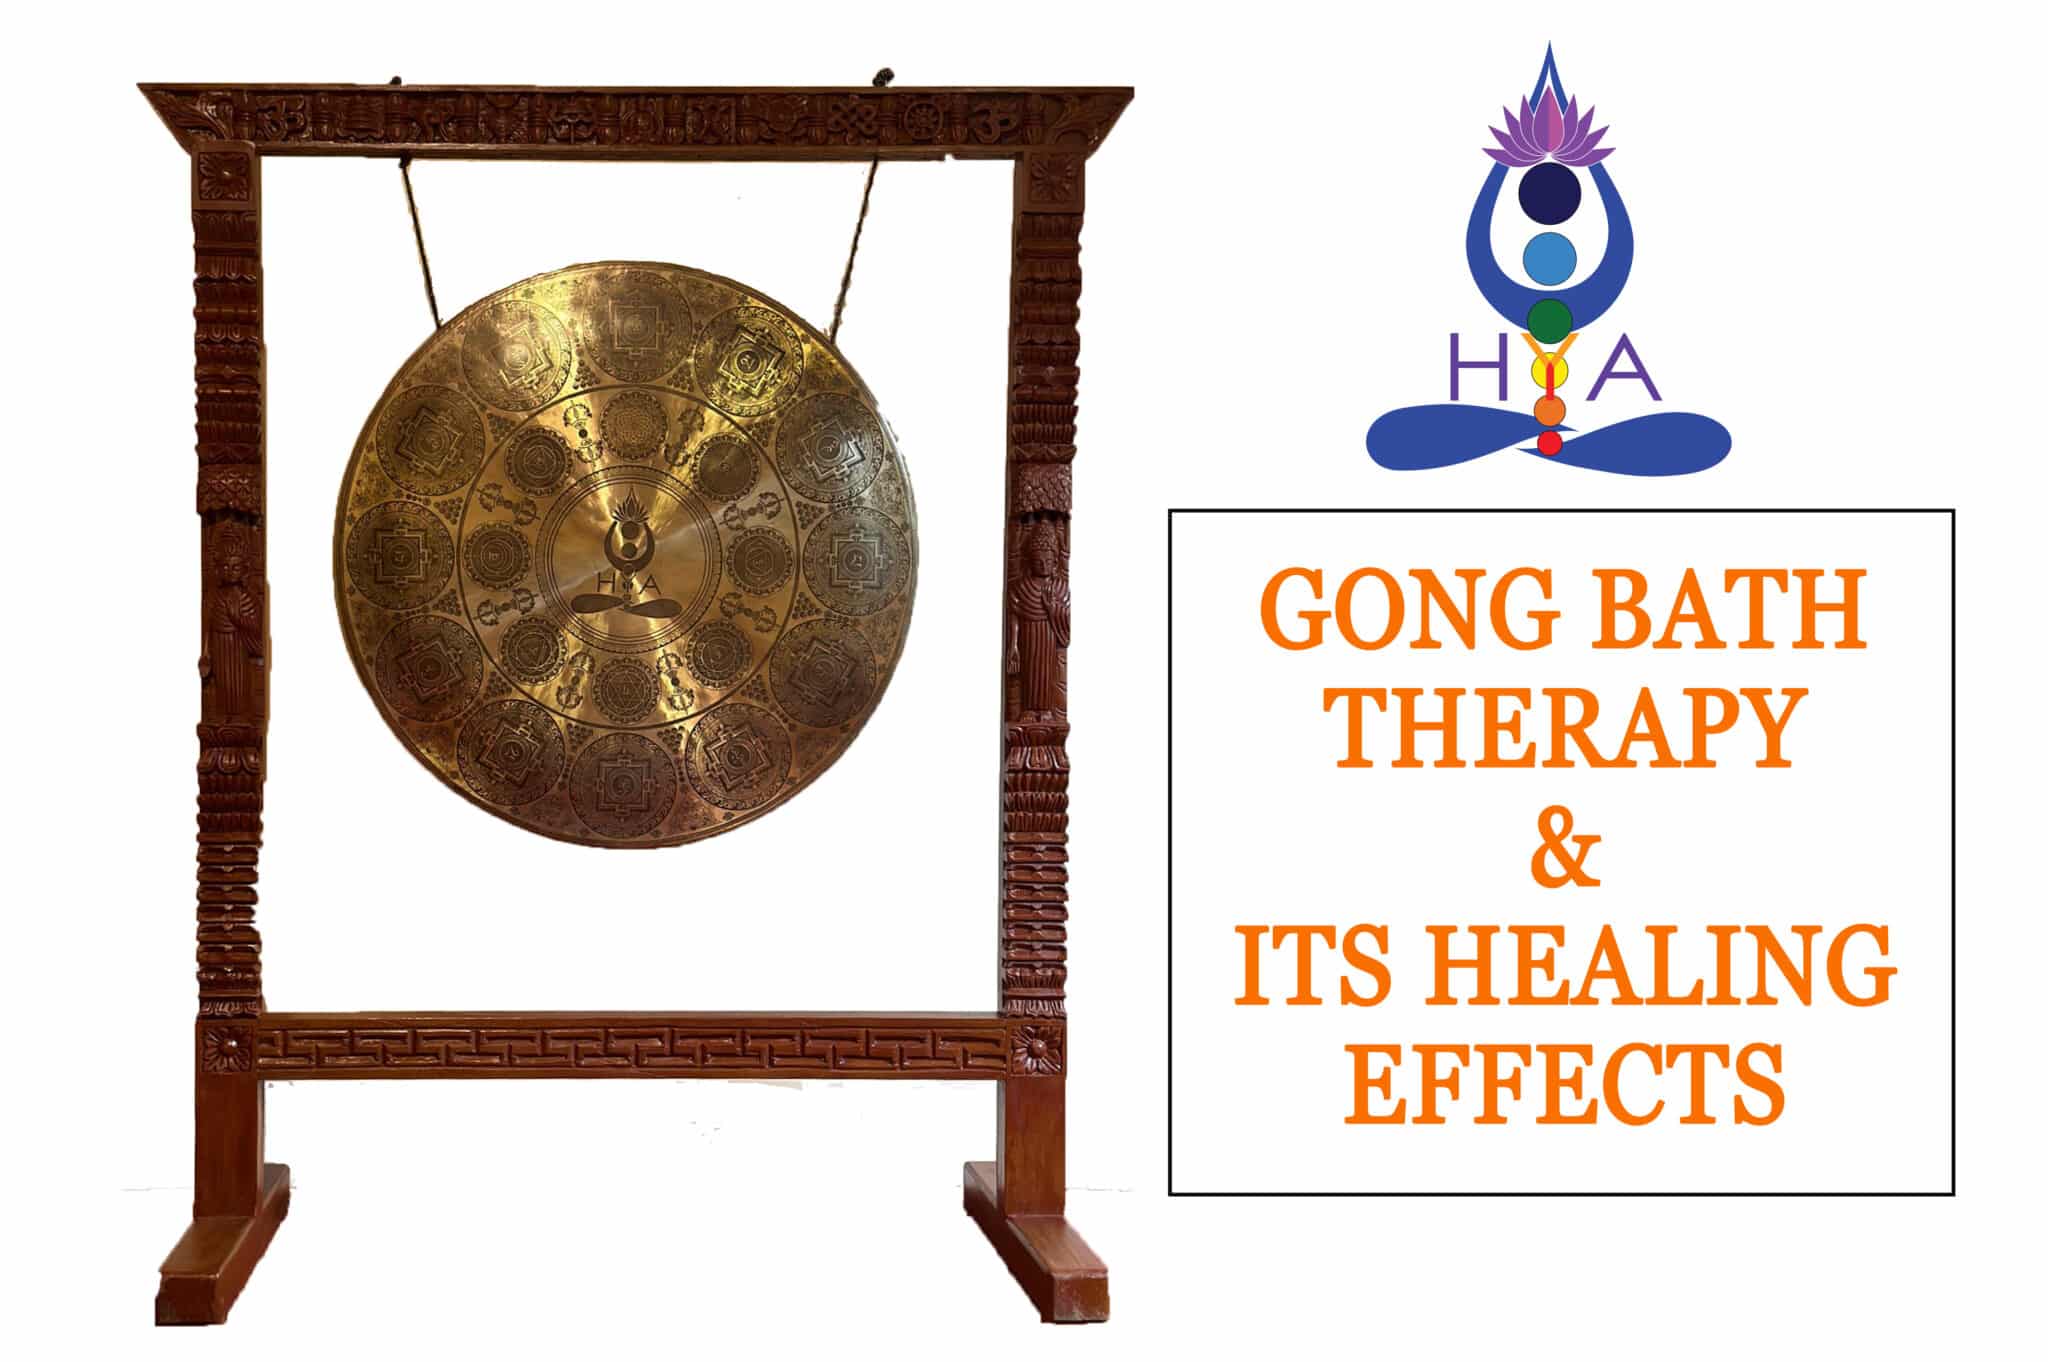 What is Gong Bath Therapy